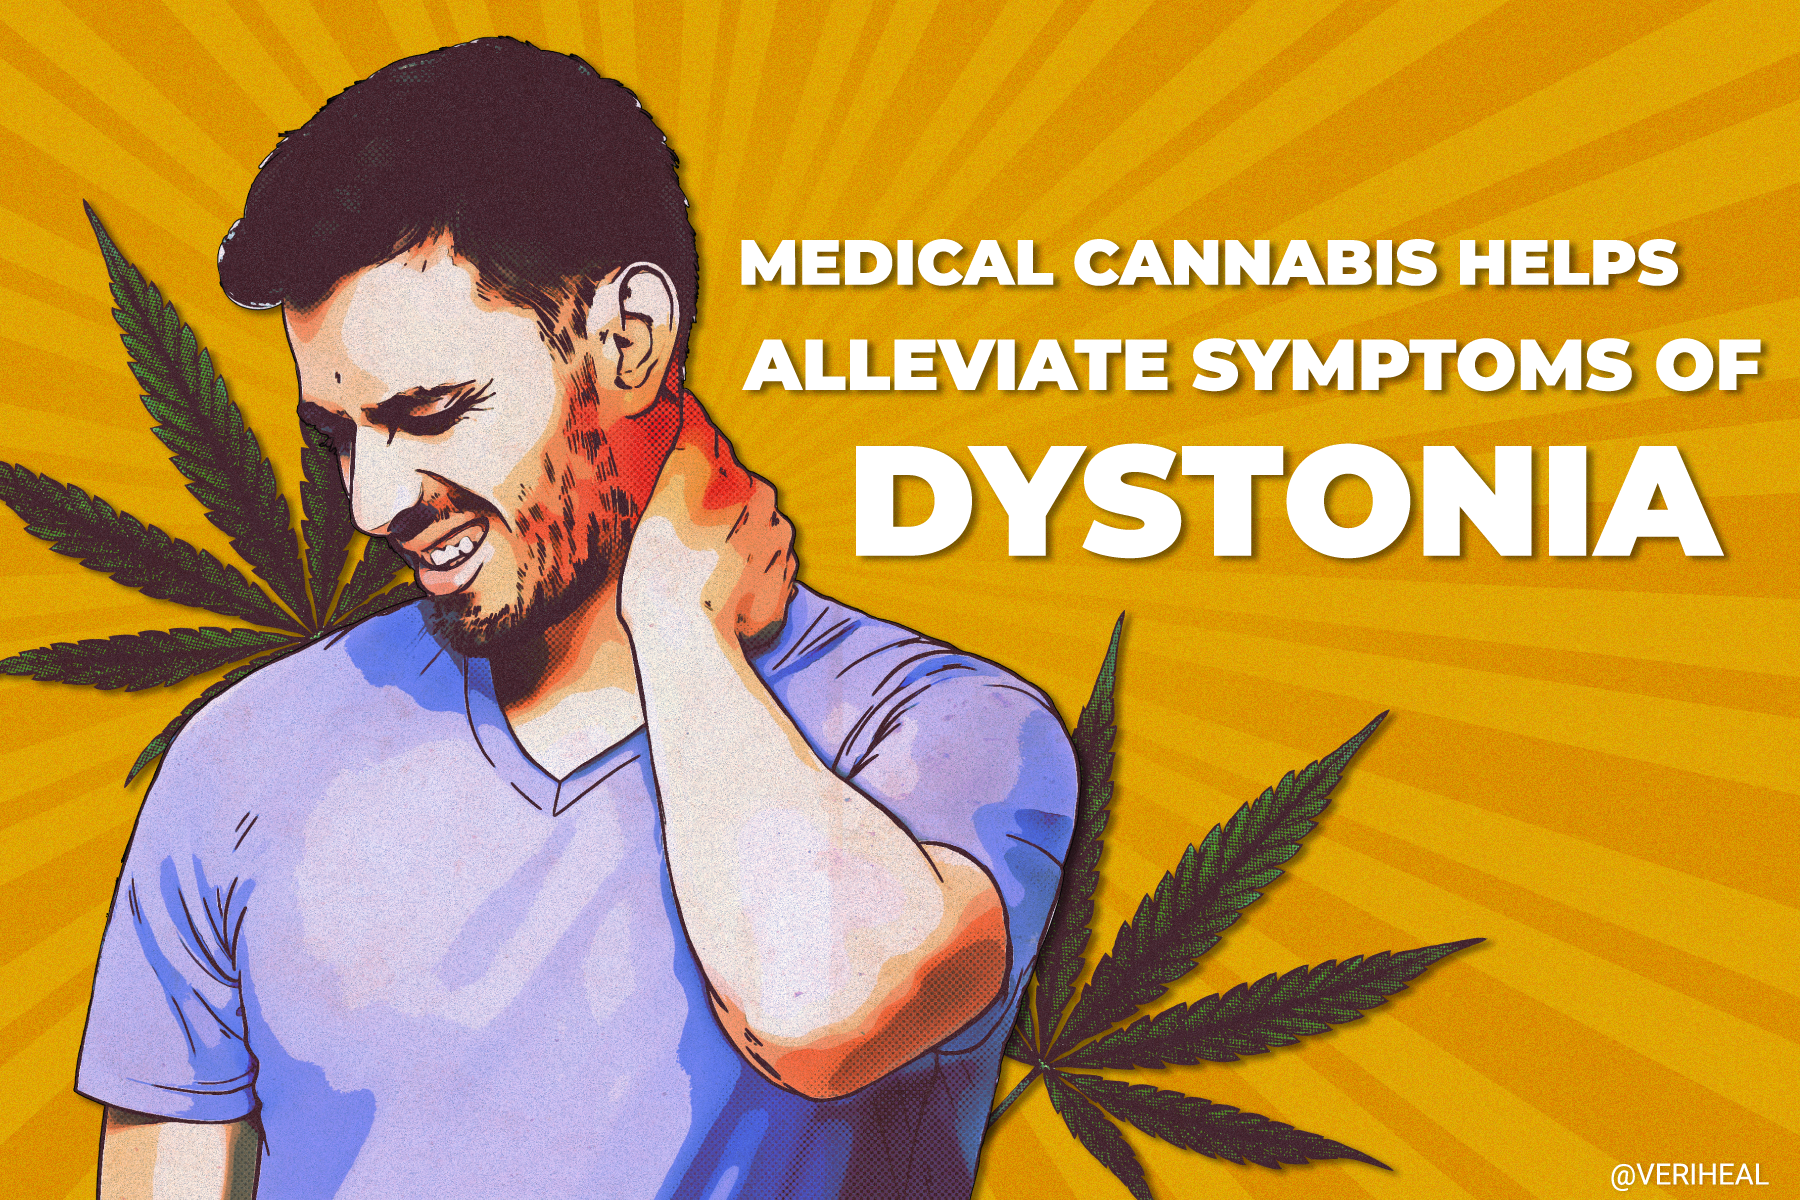 Study Shows That Medical Cannabis Helps Alleviate Symptoms of Dystonia